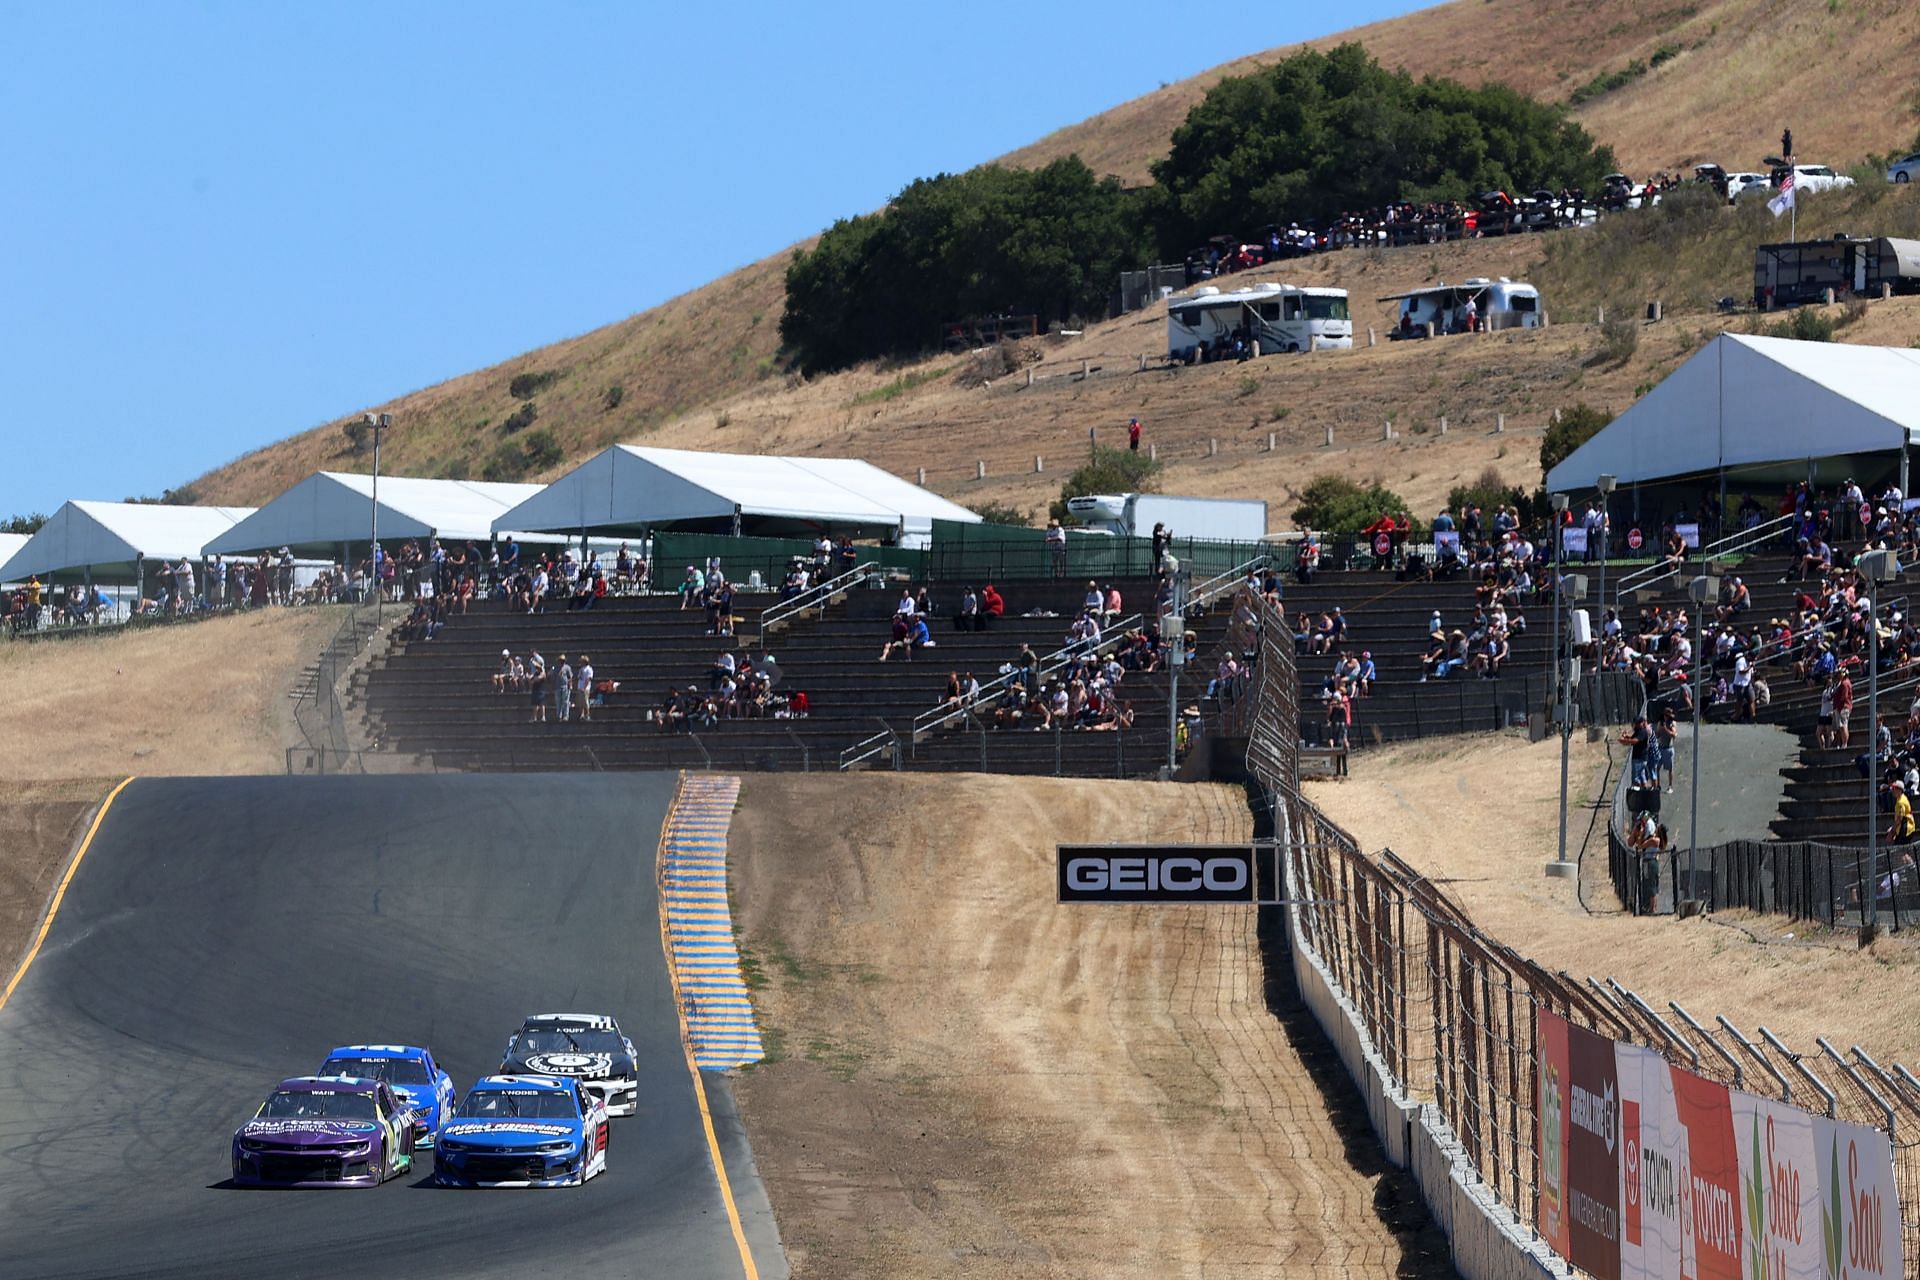 Cars race past grandstands during the NASCAR Cup Series Toyota/Save Mart 350 at Sonoma Raceway (Photo by Carmen Mandato/Getty Images)